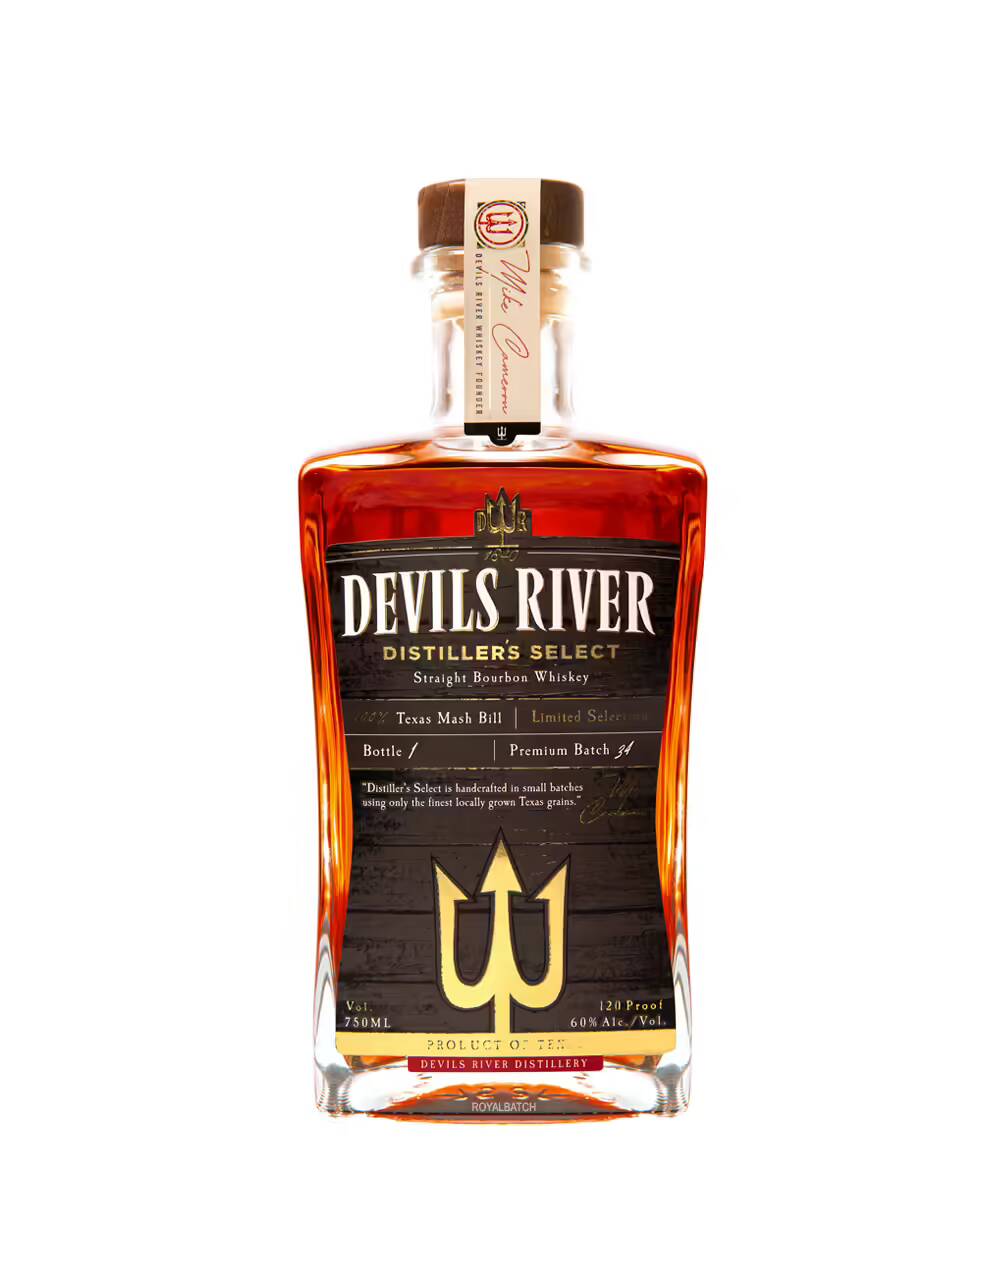 Devils River Distillers Select Texas Mash Bill Limited Selection Straight Bourbon Whiskey